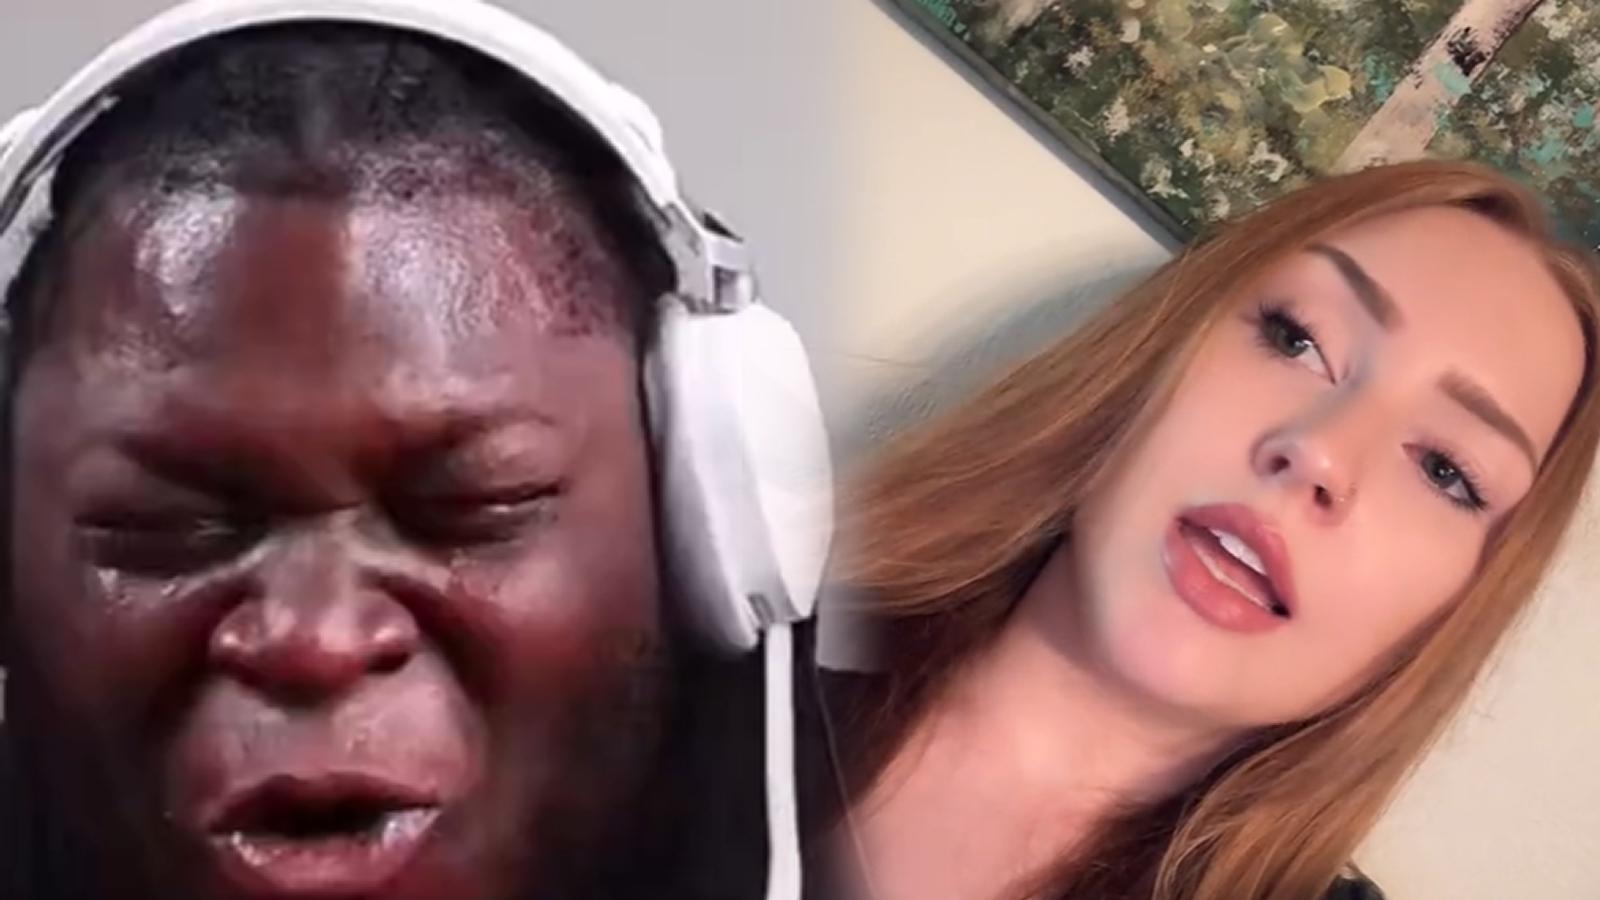 Angry Reactions breaks down on live after ex posts proof of domestic violence